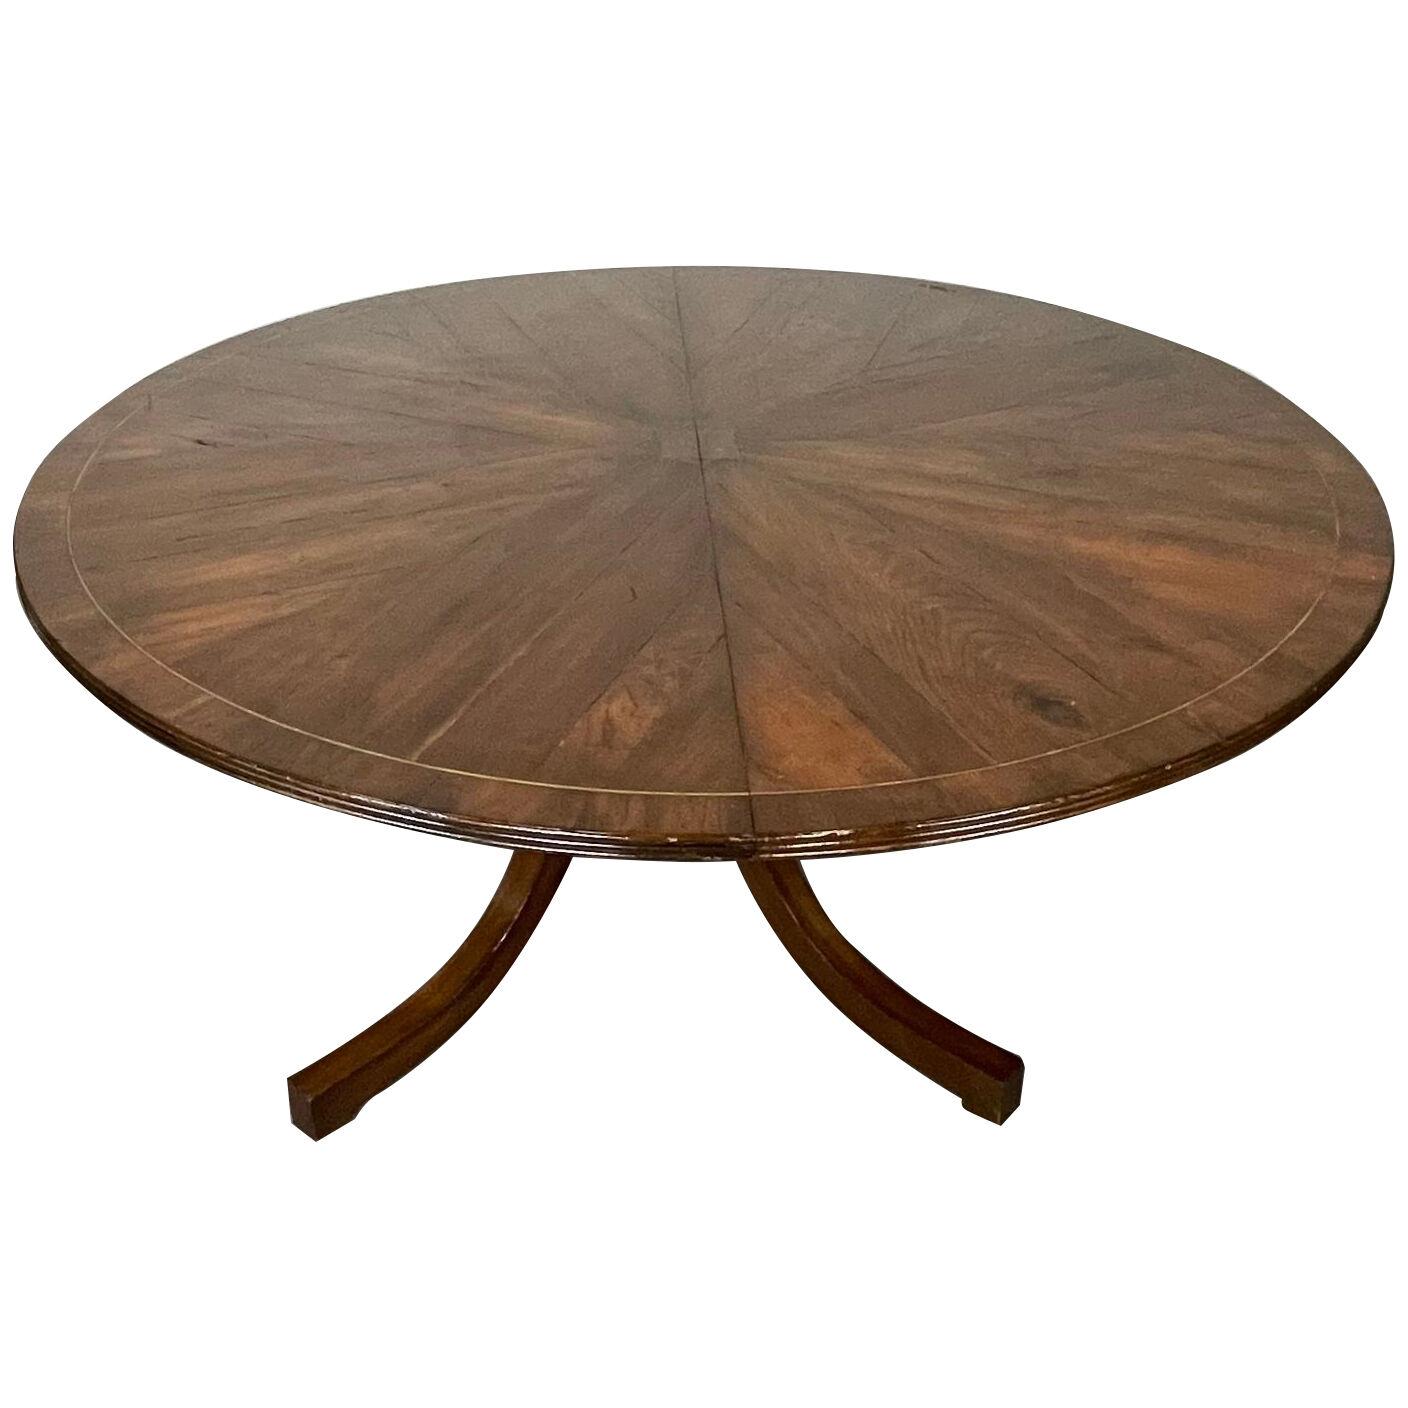 Split C-Leg Rustic Dining Table, Two Large Leaves, Brass Inlays